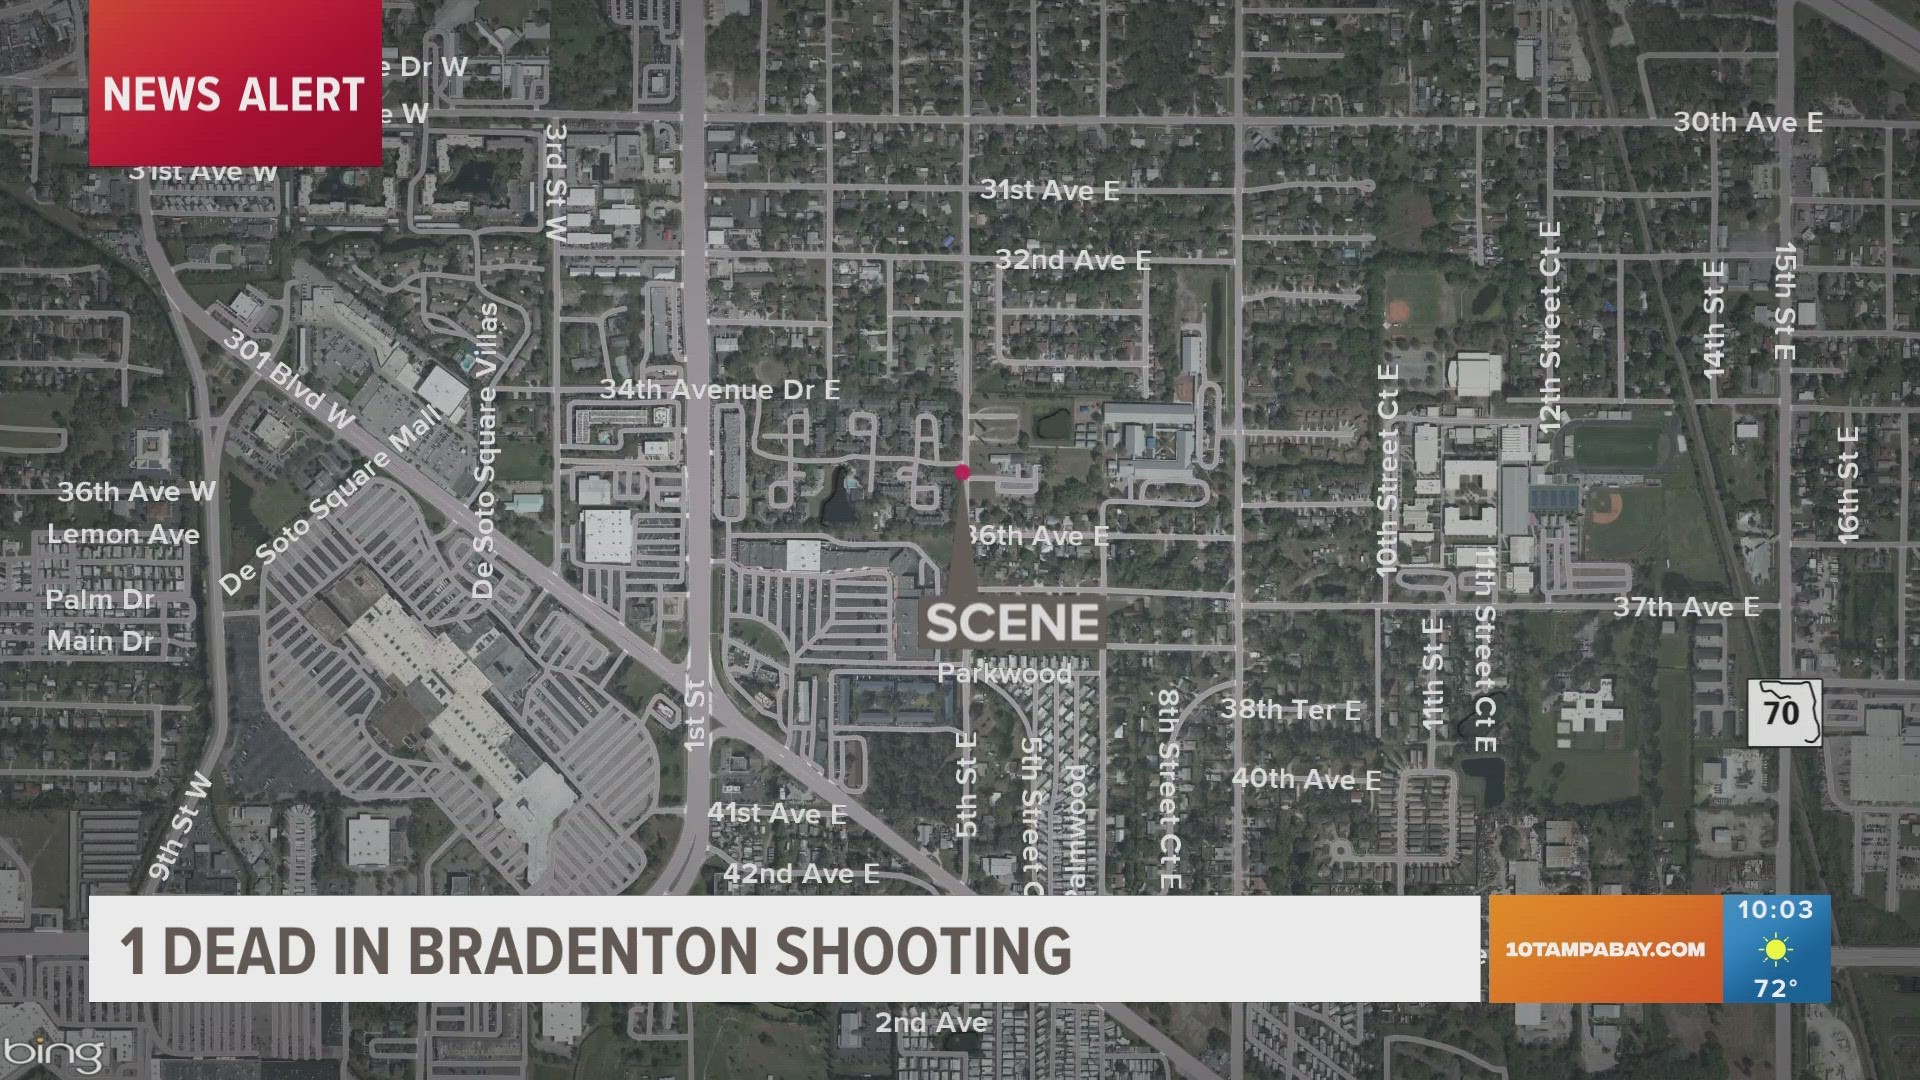 An 18-year-old died from his injuries following a shooting Friday evening, authorities said.